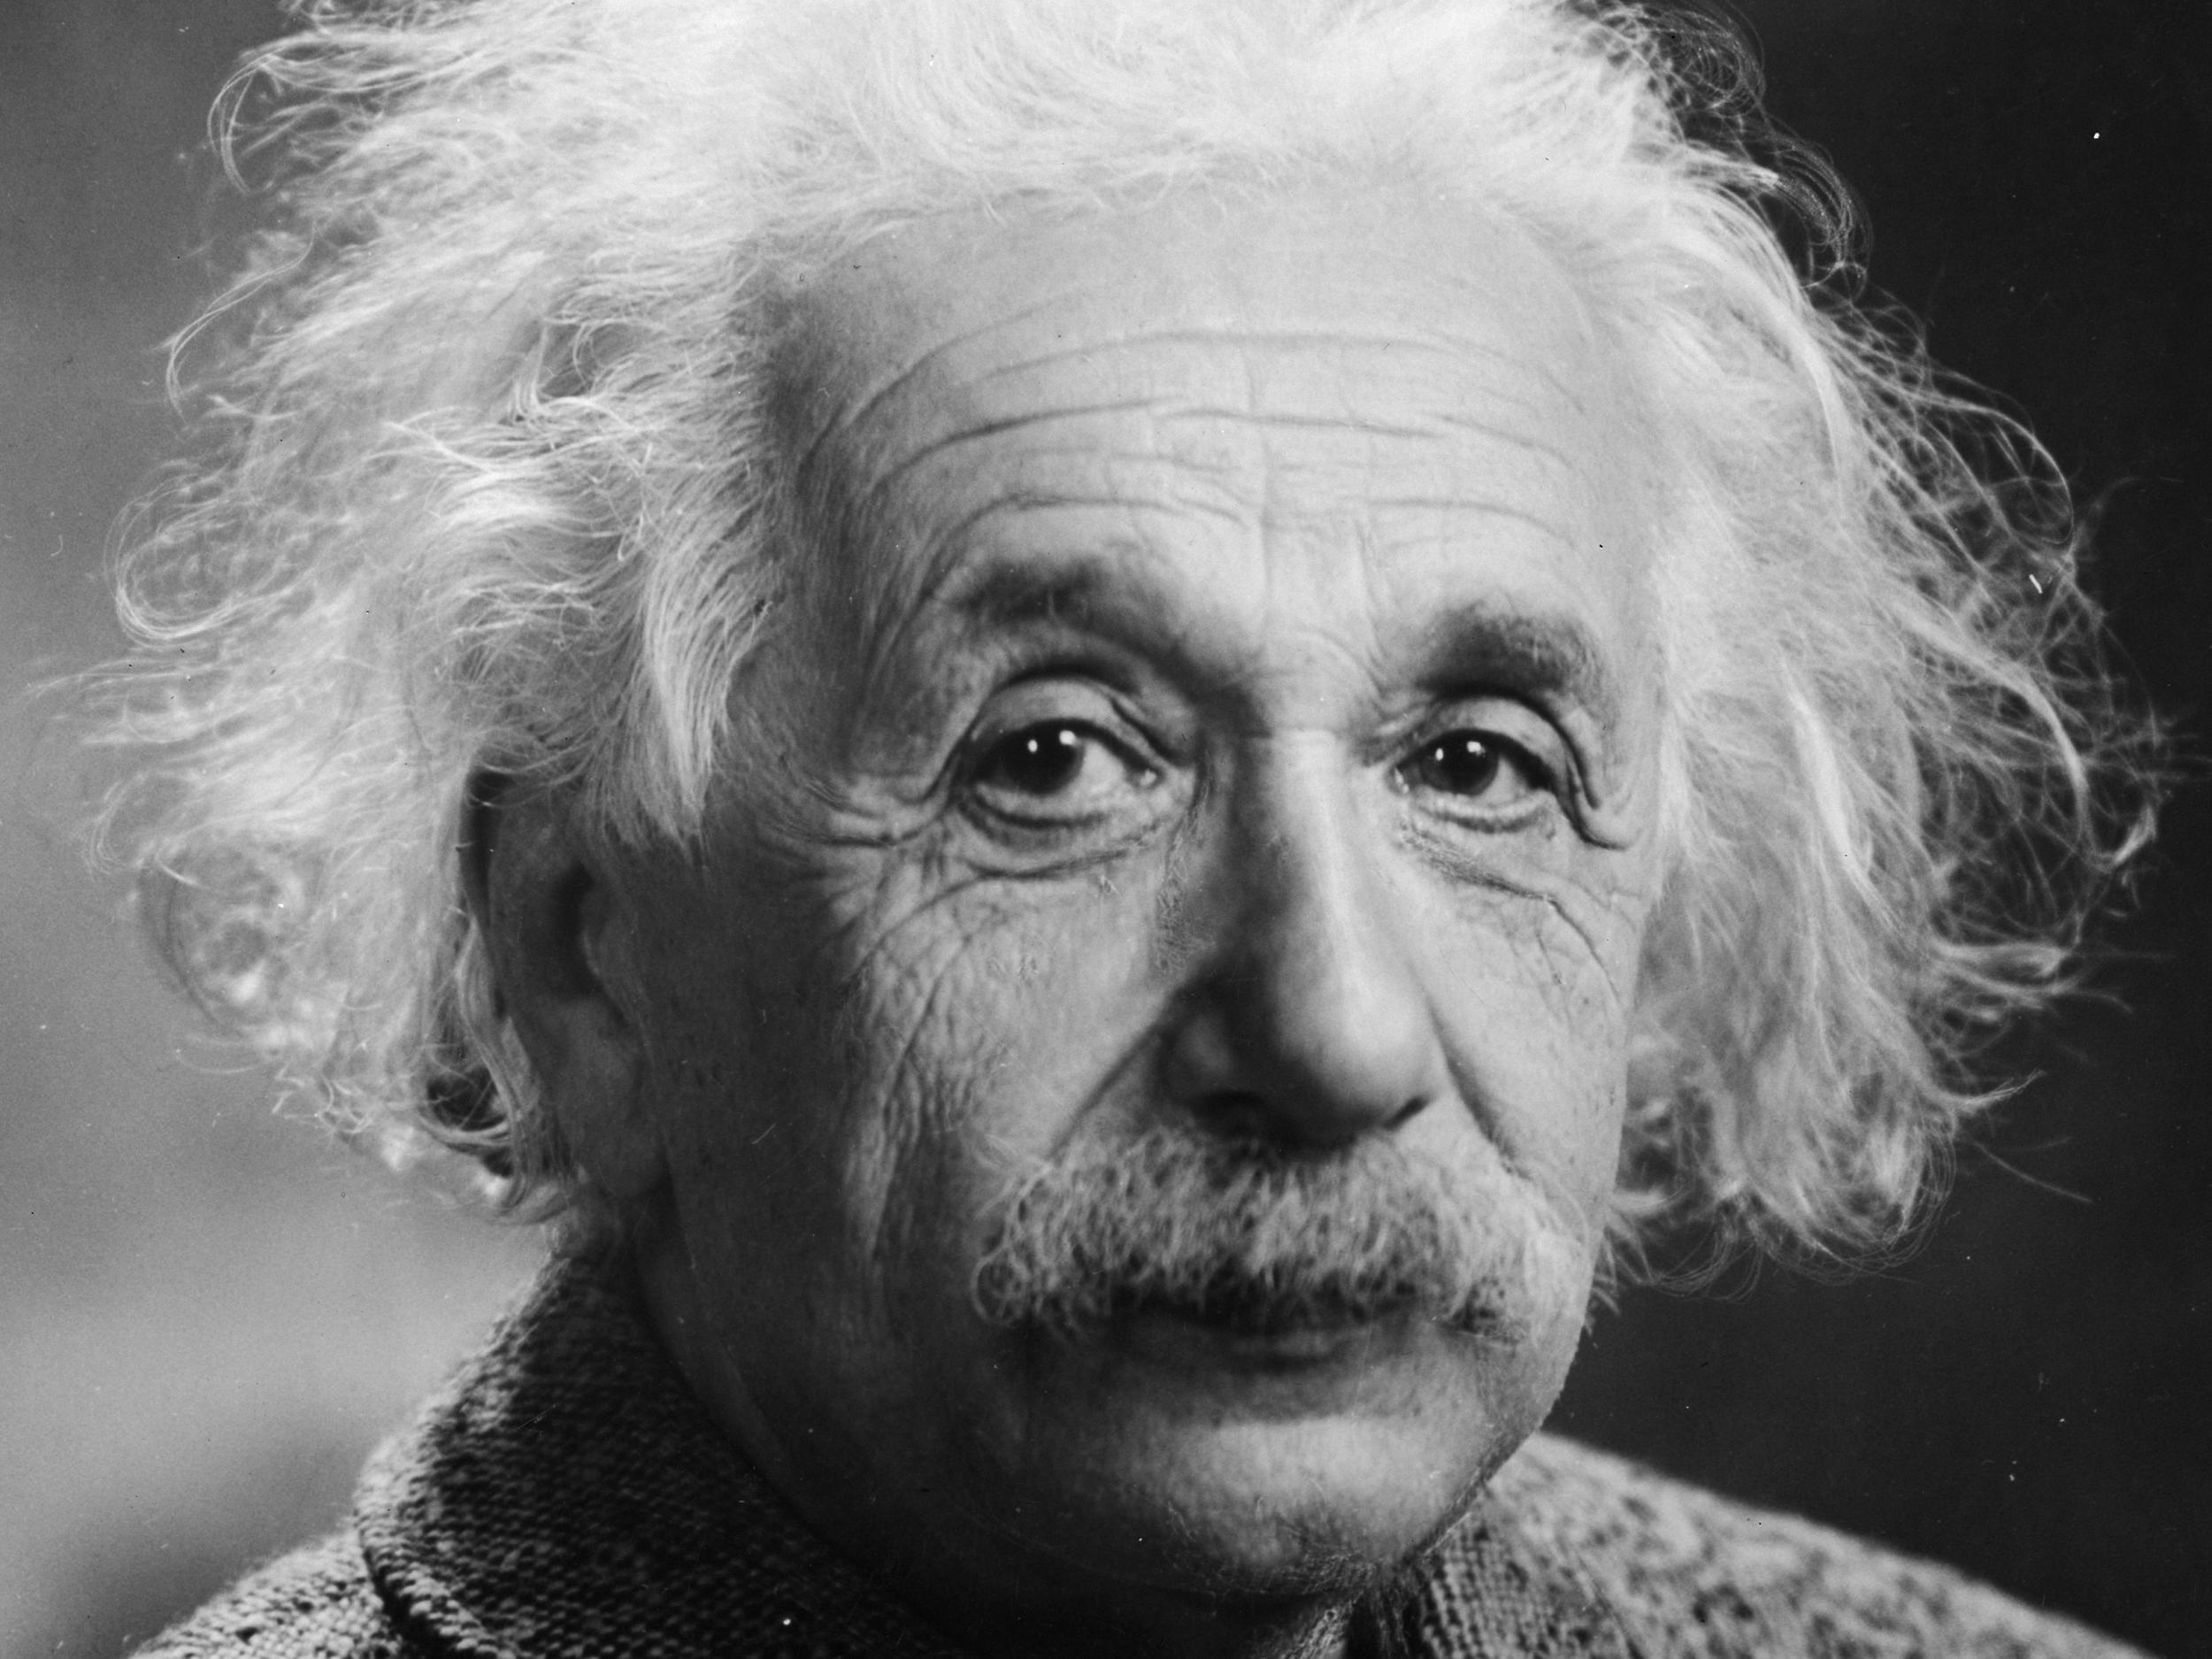 Albert Einstein, one of the greatest scientists of all time, was considered absent-minded by some